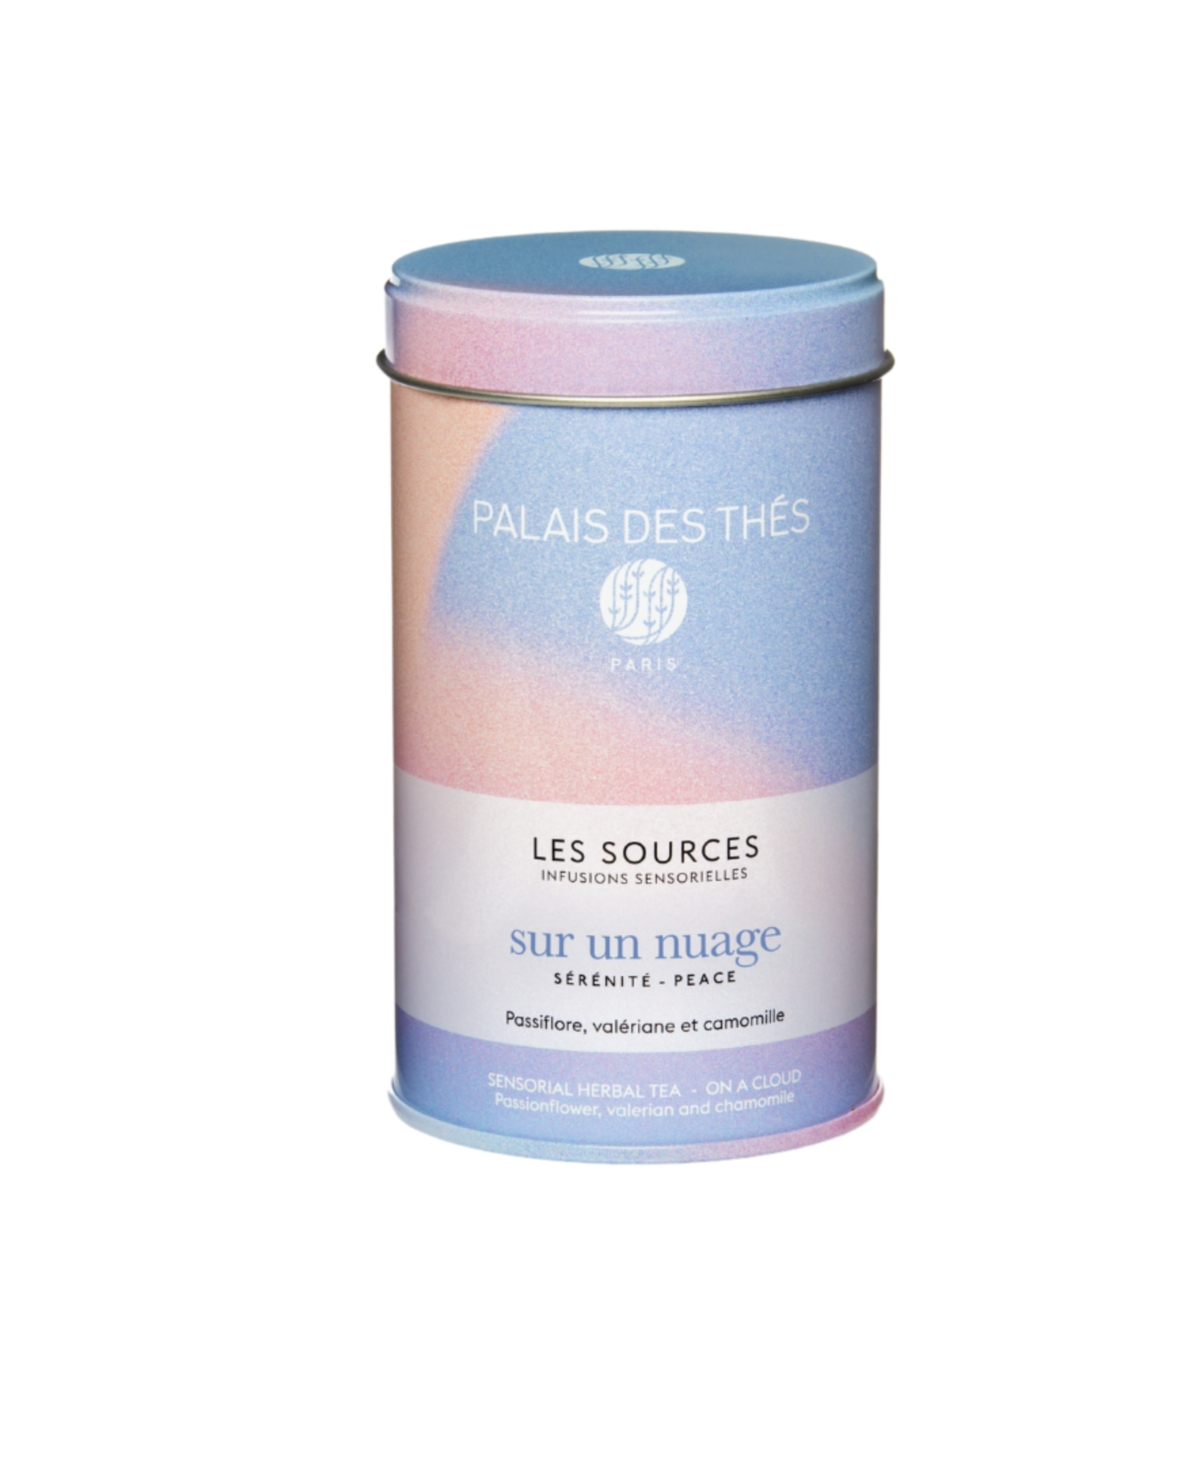 Palais Des Thes Passionflower, Valerian And Chamomile Sensorial Herbal Tea Holiday Gift In No Color